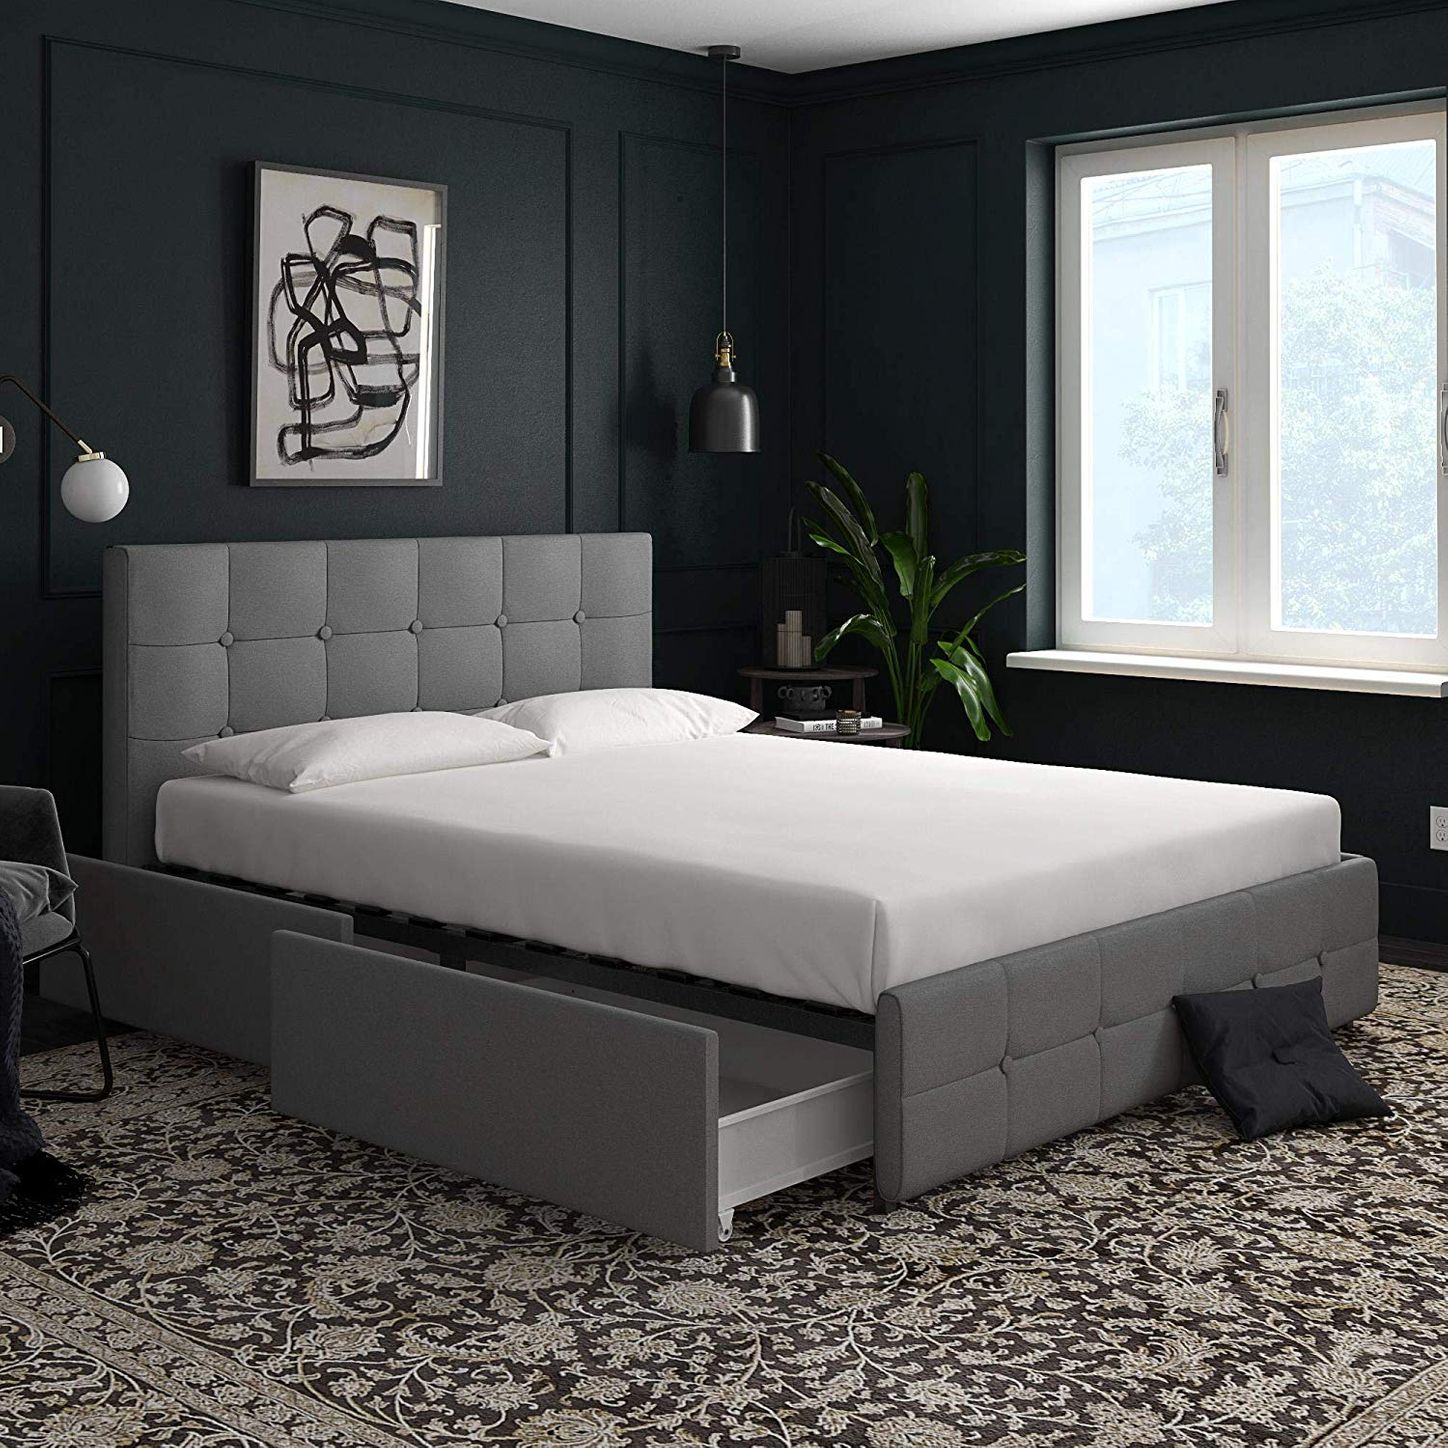 21 Best Platform Beds 2021 The Strategist, How To Make A Platform Bed With Drawers Underneath